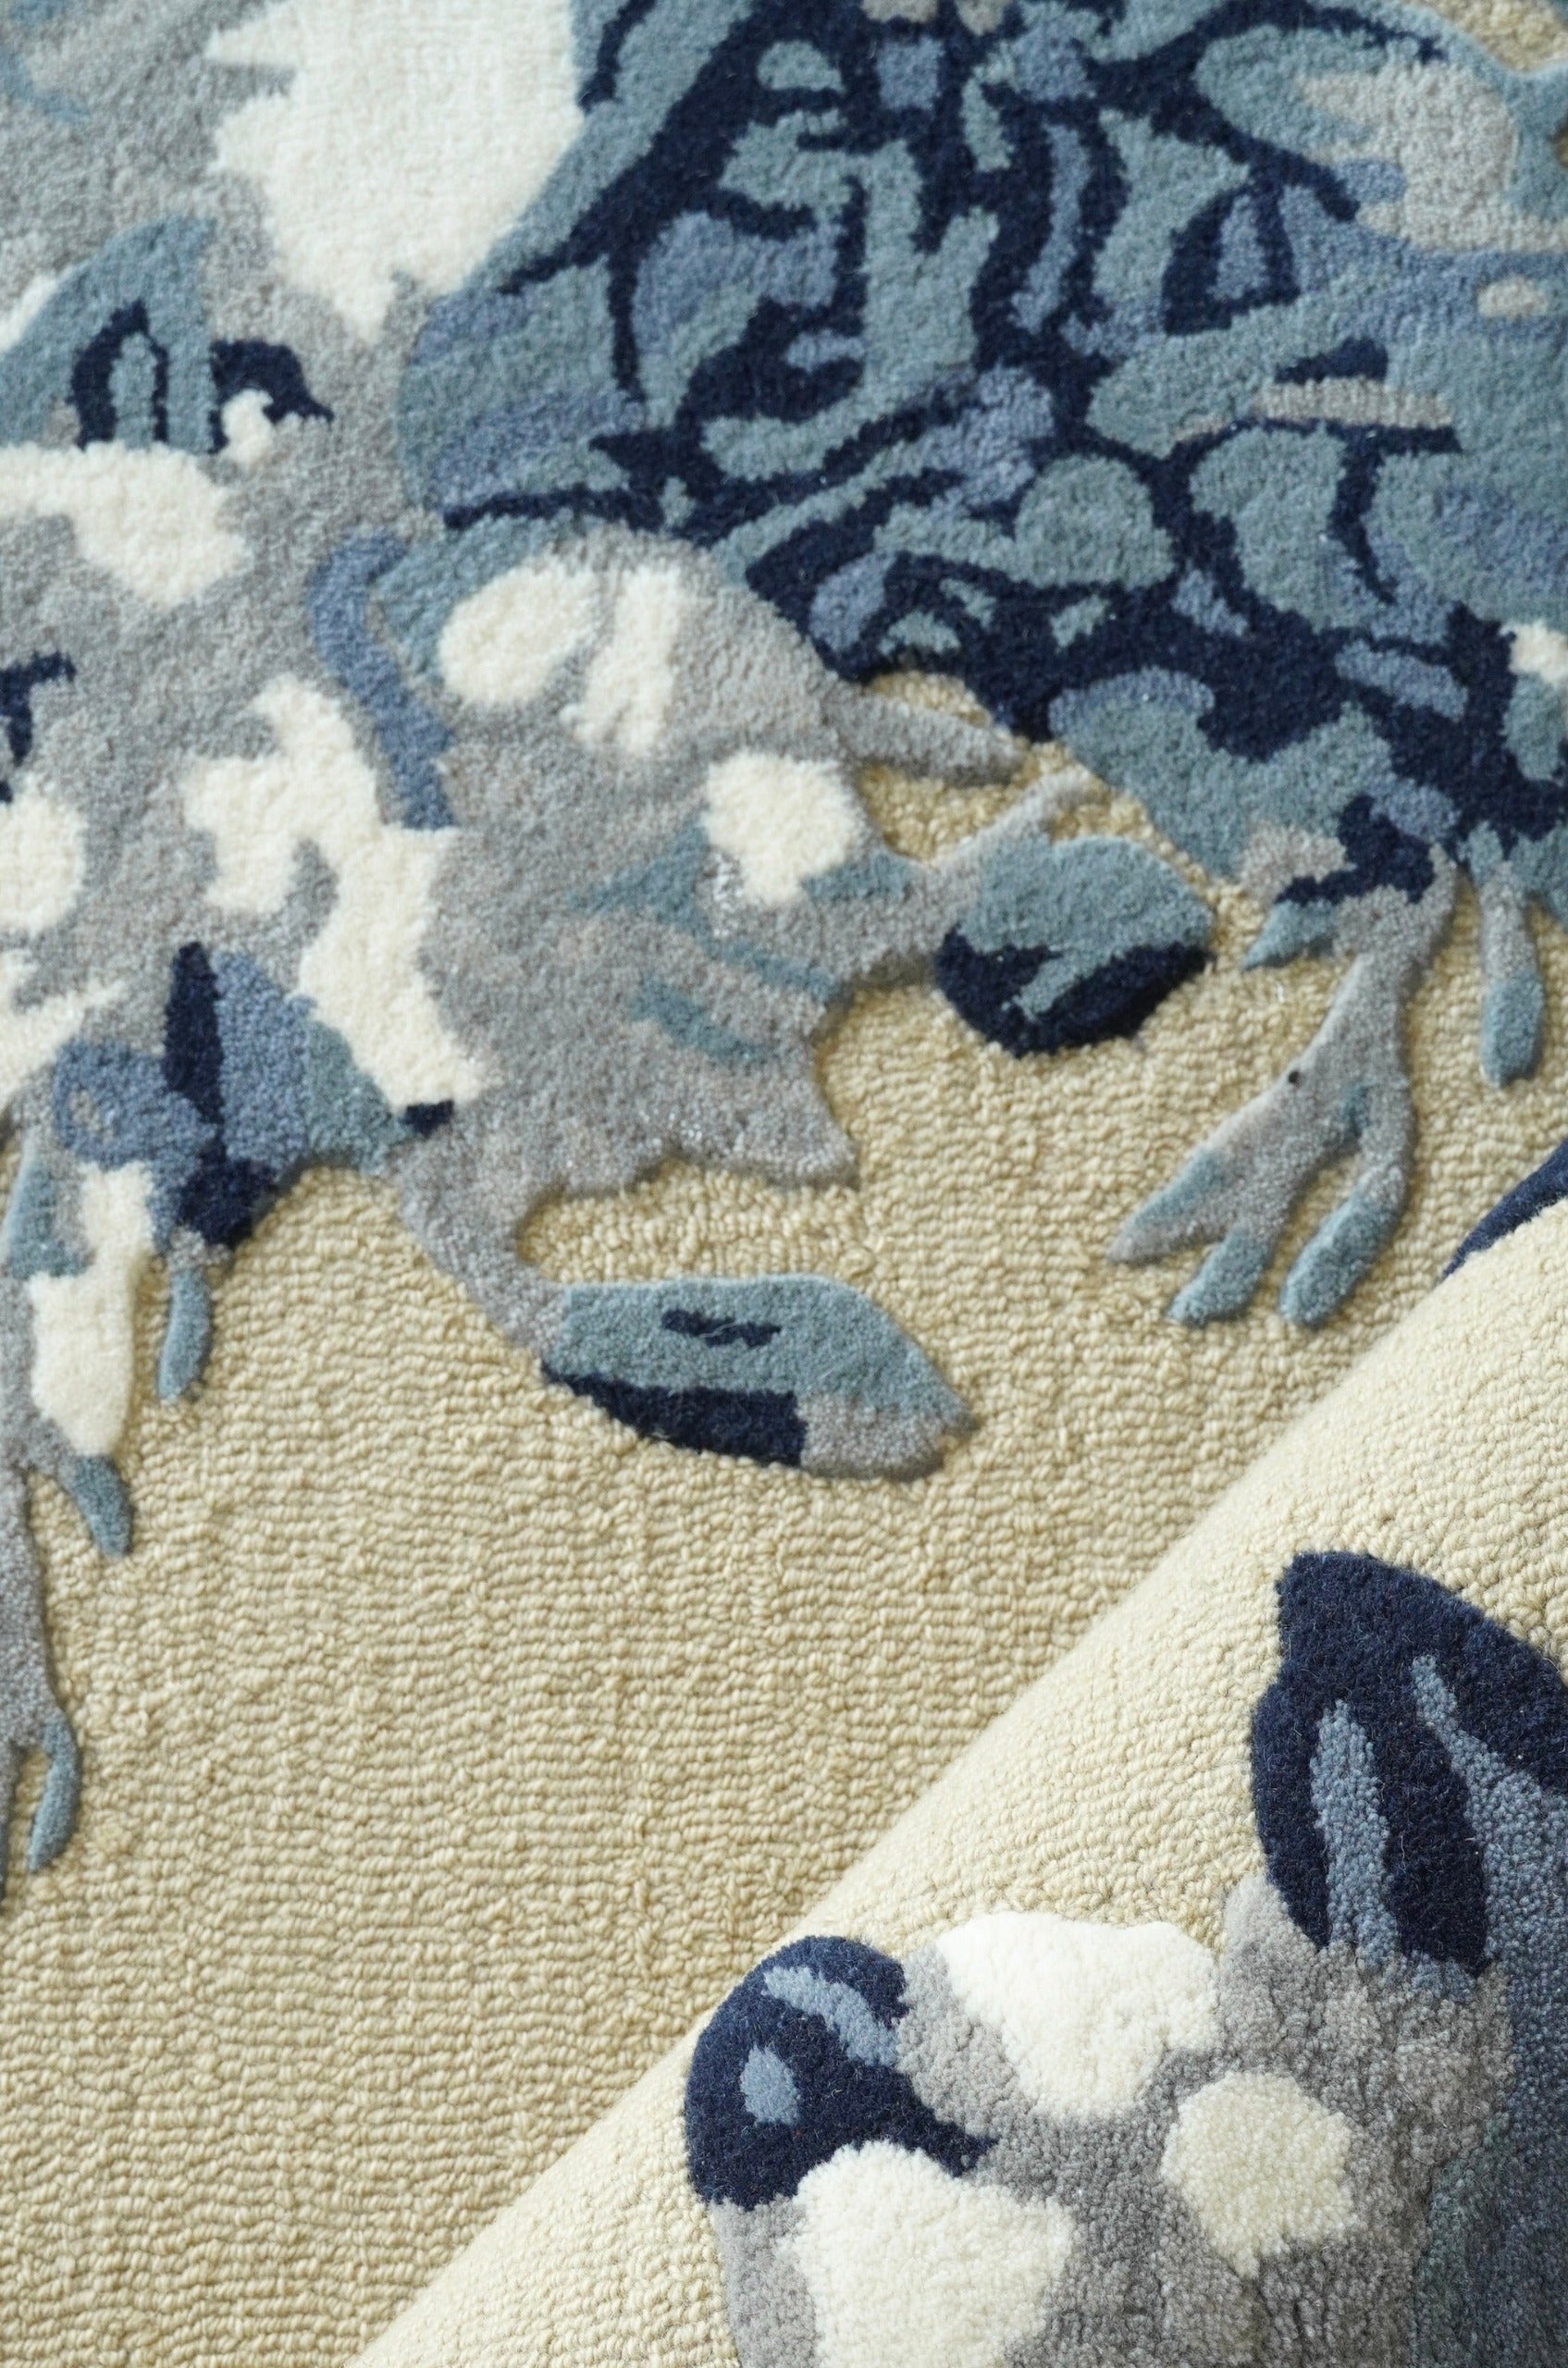 Create an alfresco sensory experience indoors with the luxurious Indigo Perennials’ lush blue blooms at your feet. The textured softness of the hand tufted New Zealand wool, woven with the silkiness of Jasmine silk, enhances the English garden inspired design. Combining the best of blue and purple hues, the indigo flowers in a 3D cut-out embody the beauty and complexity of floral architecture. The Indigo Perennials is once in a blue moon décor choice, perfect for any living space!